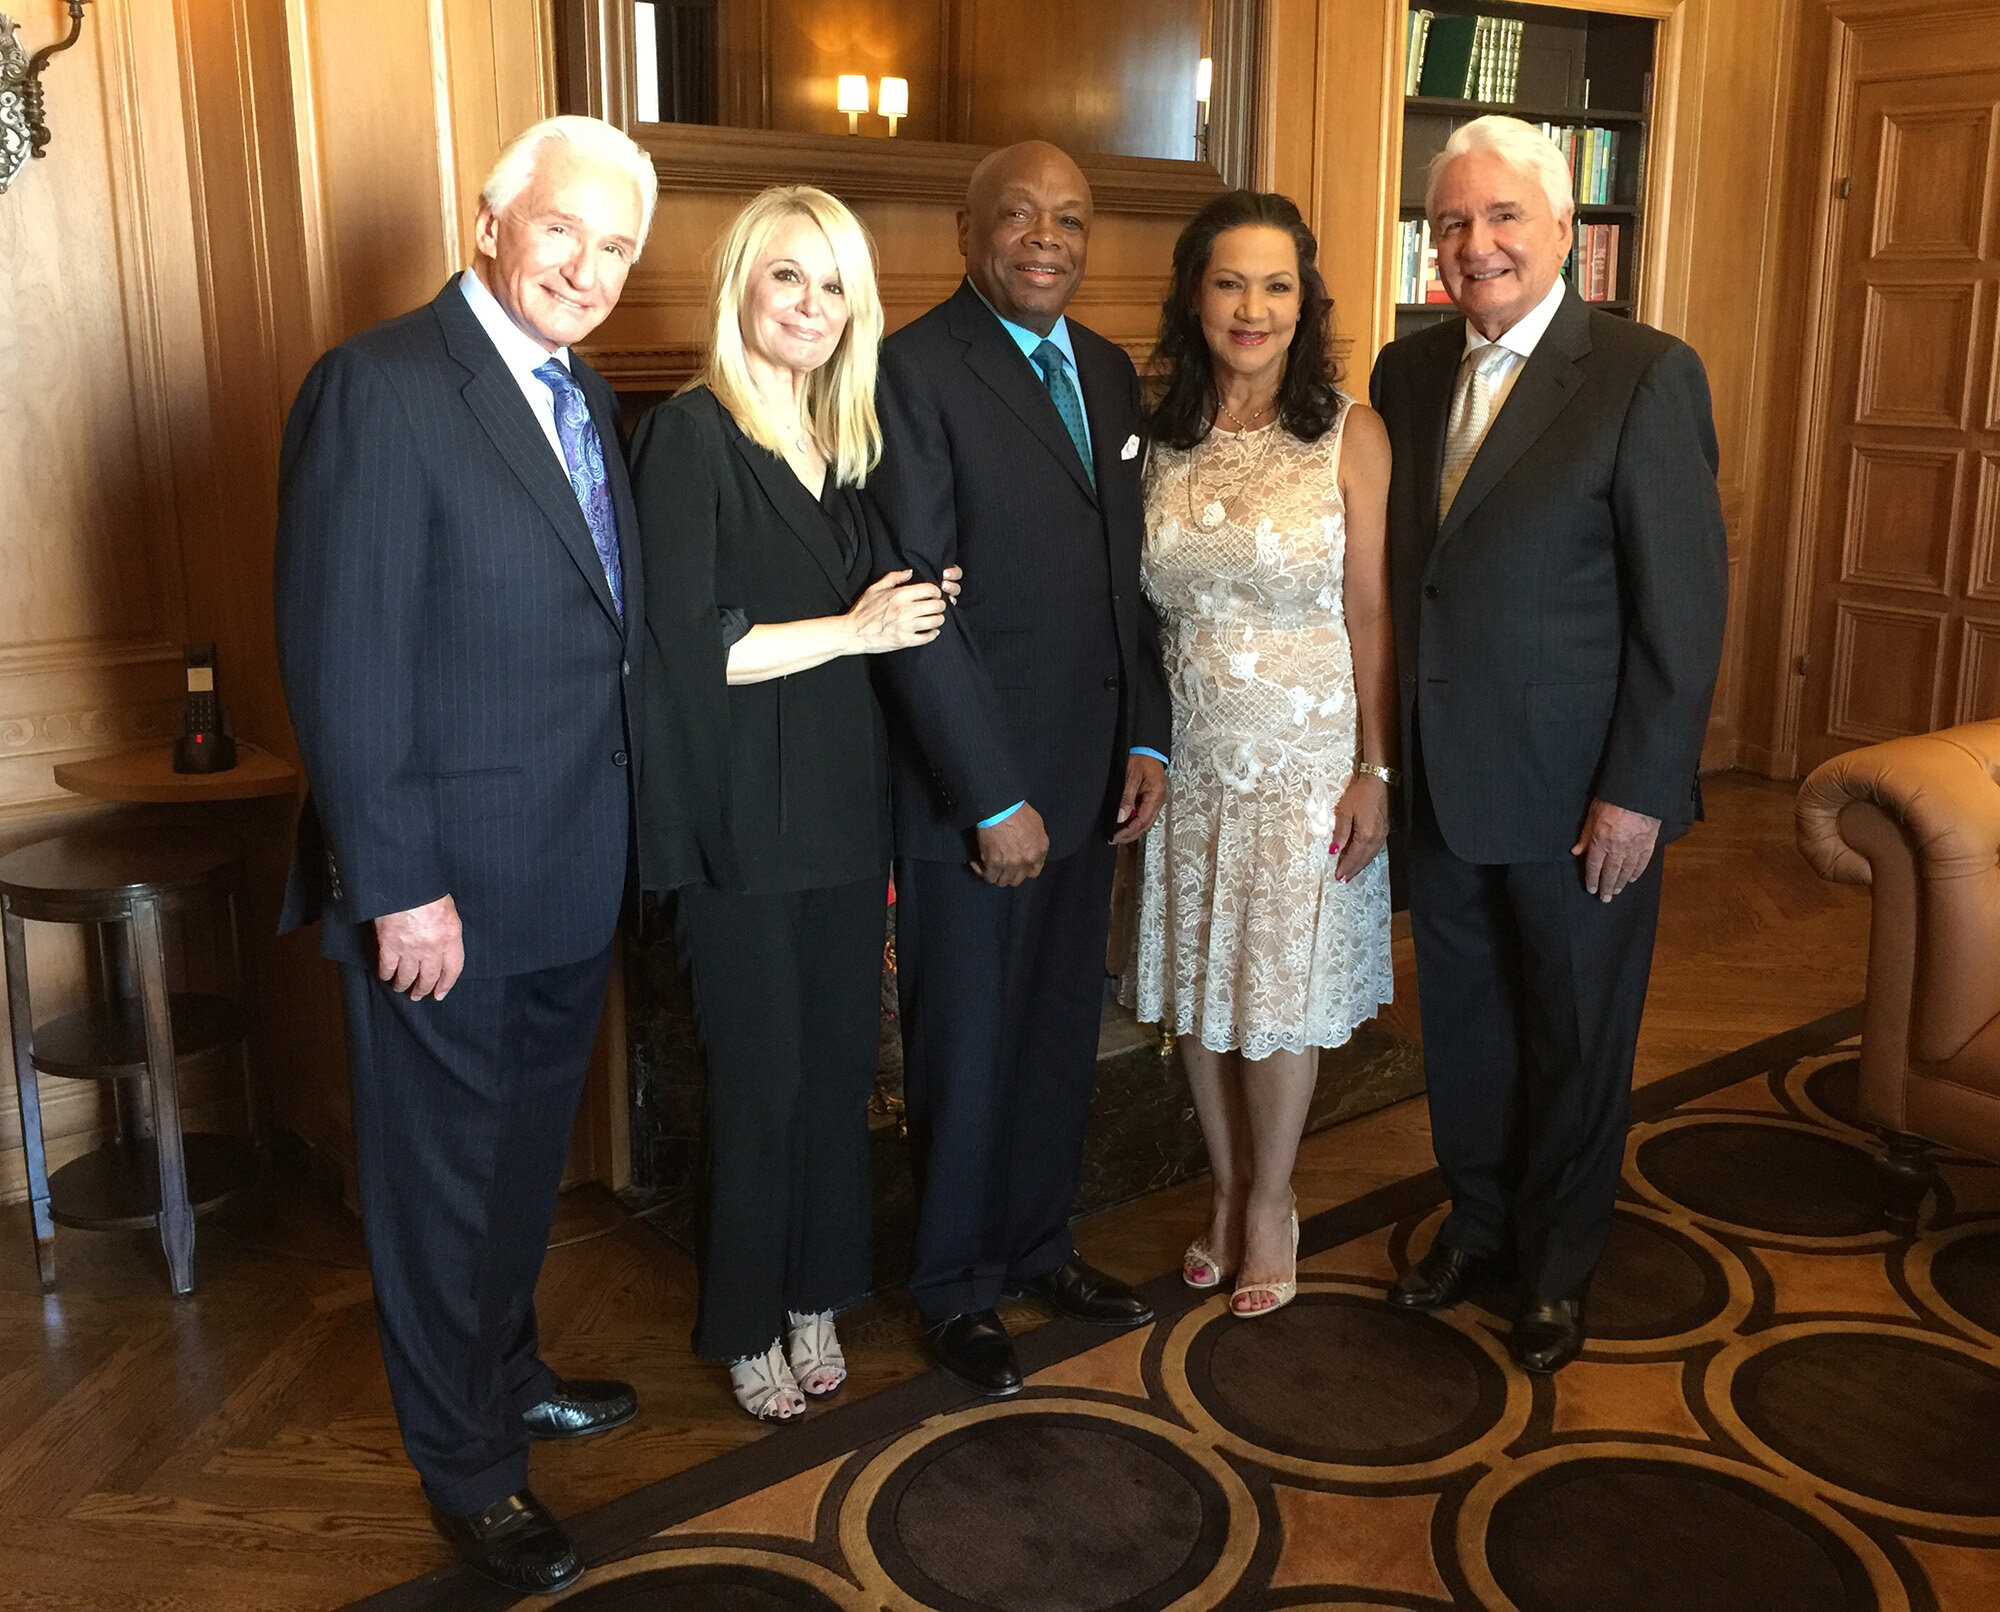  Left to right: My twin brother, Brian; his wife, Jennifer; former mayor of San Francisco, Willie Brown; my wife Michelle; and me. Taken at the Fairmont Hotel in San Francisco. 